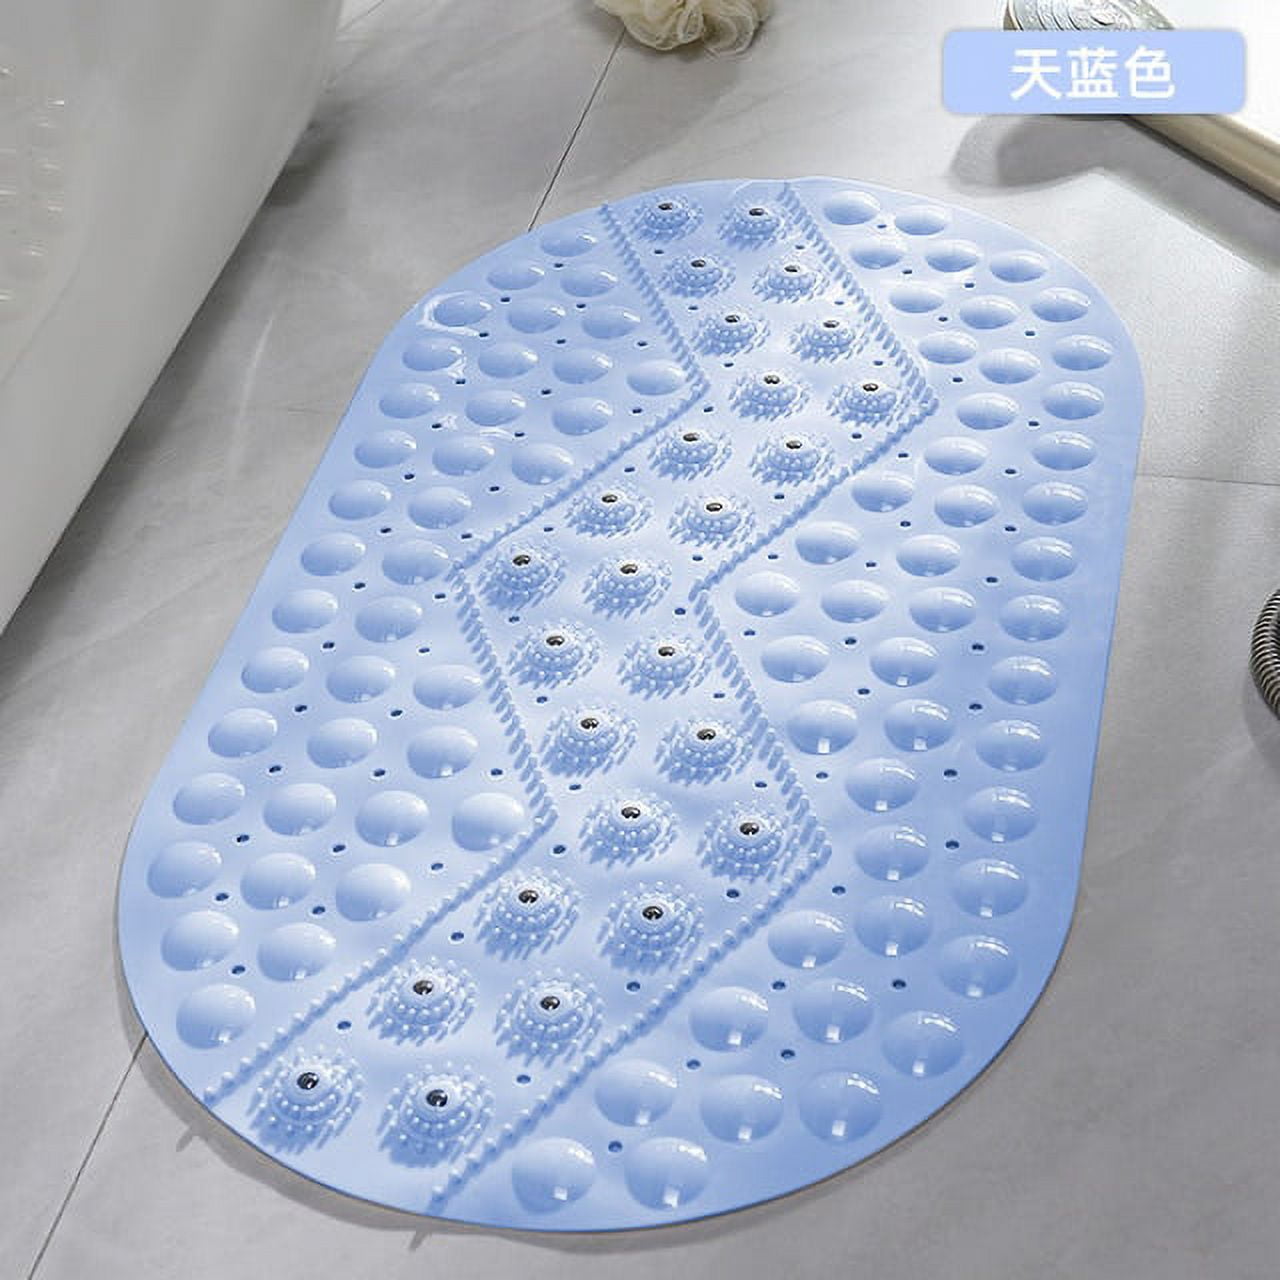 Semfri Gray Round Non Slip Shower Mat 22 x 22 Inches Textured Surface Anti Slip Bath Mats with Drain Hole in Middle Bathroom Bath Massage Foot Mat for